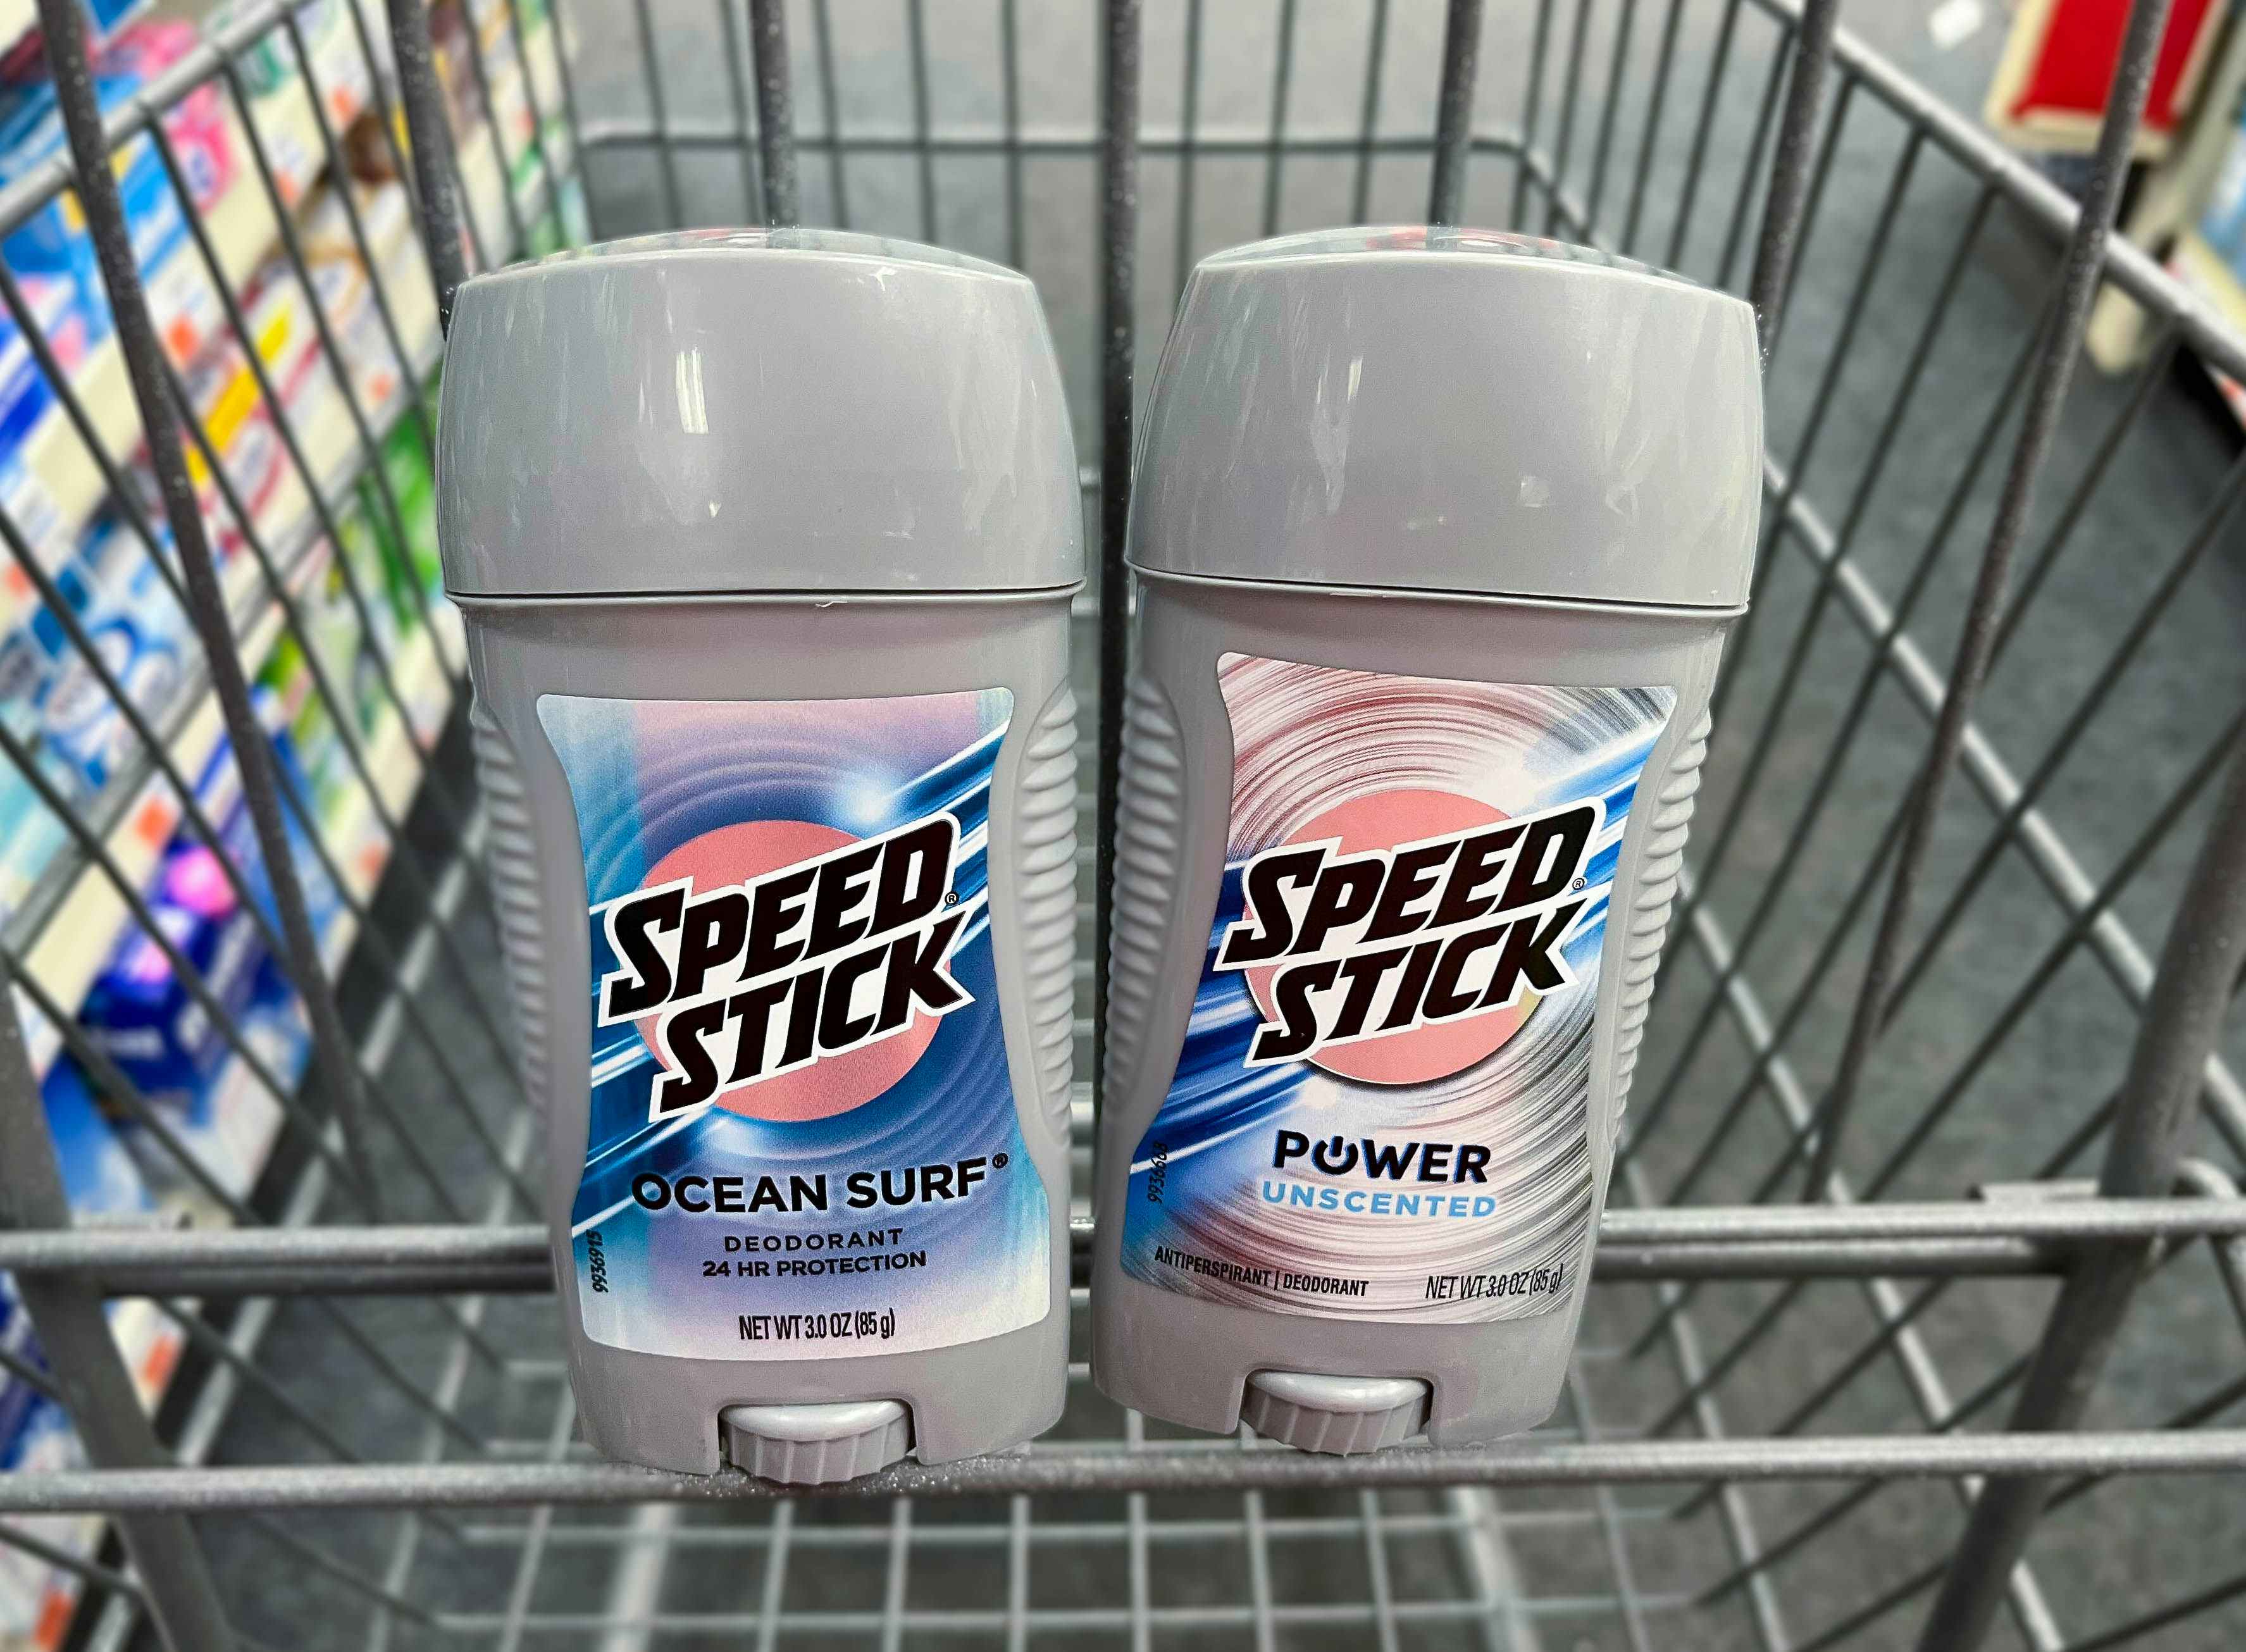 two speed stick deodorants in shopping cart